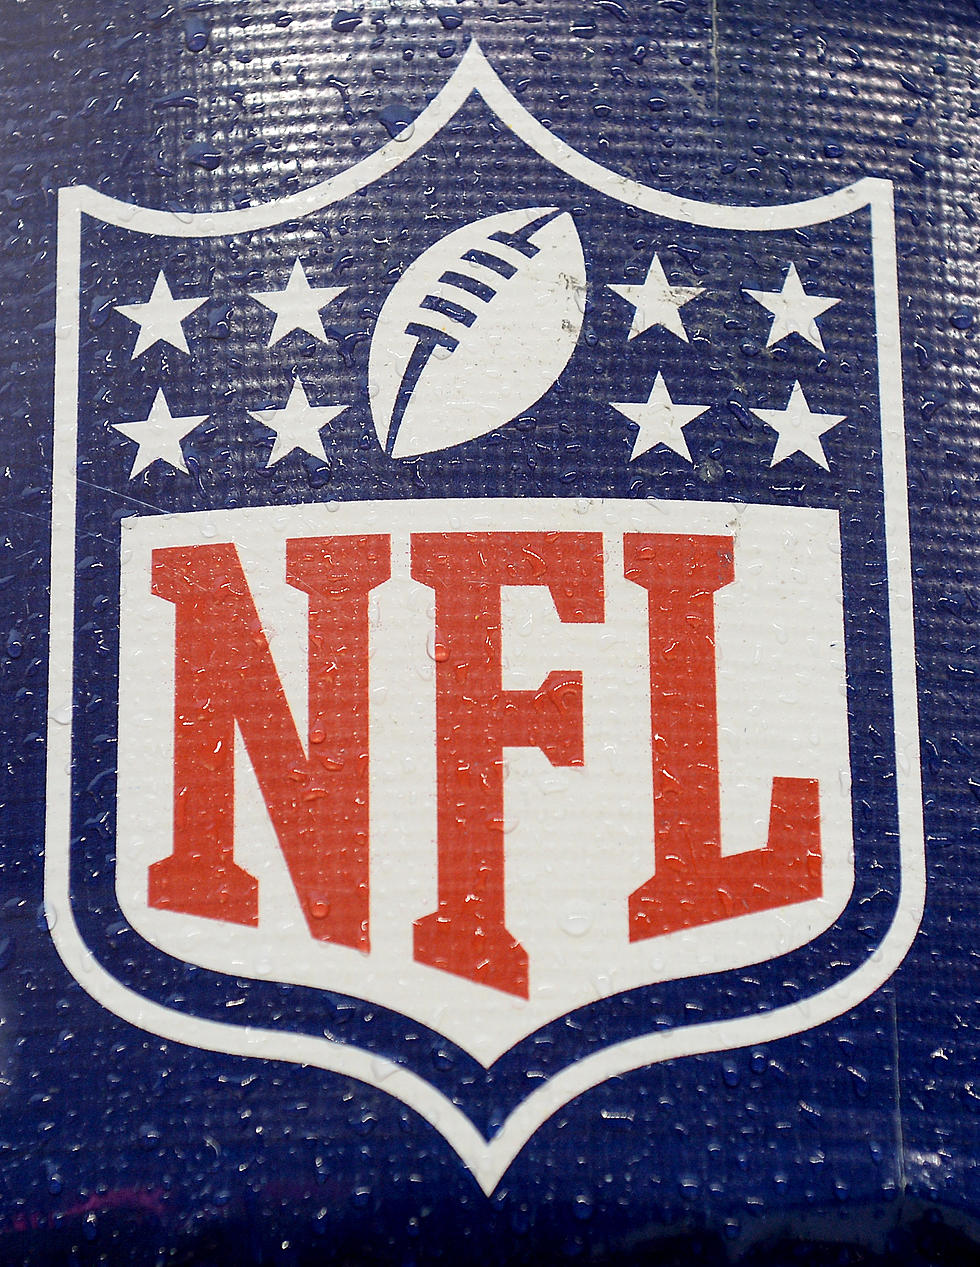 The Acronym NFL Does Mean Not For Long In The Case Of Pay To Play